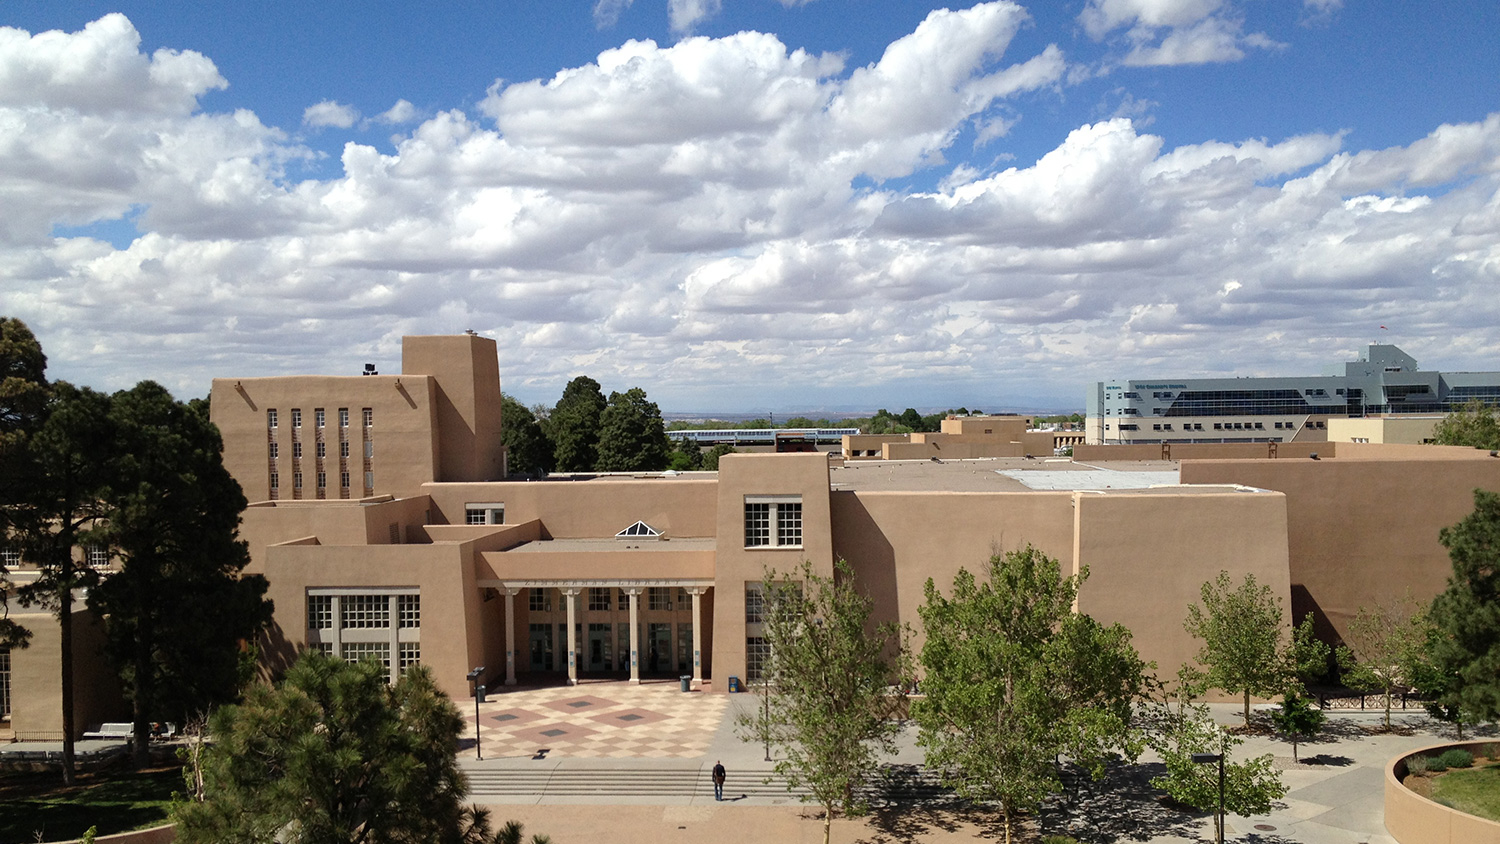 The University of New Mexico's campus against a blue sky.